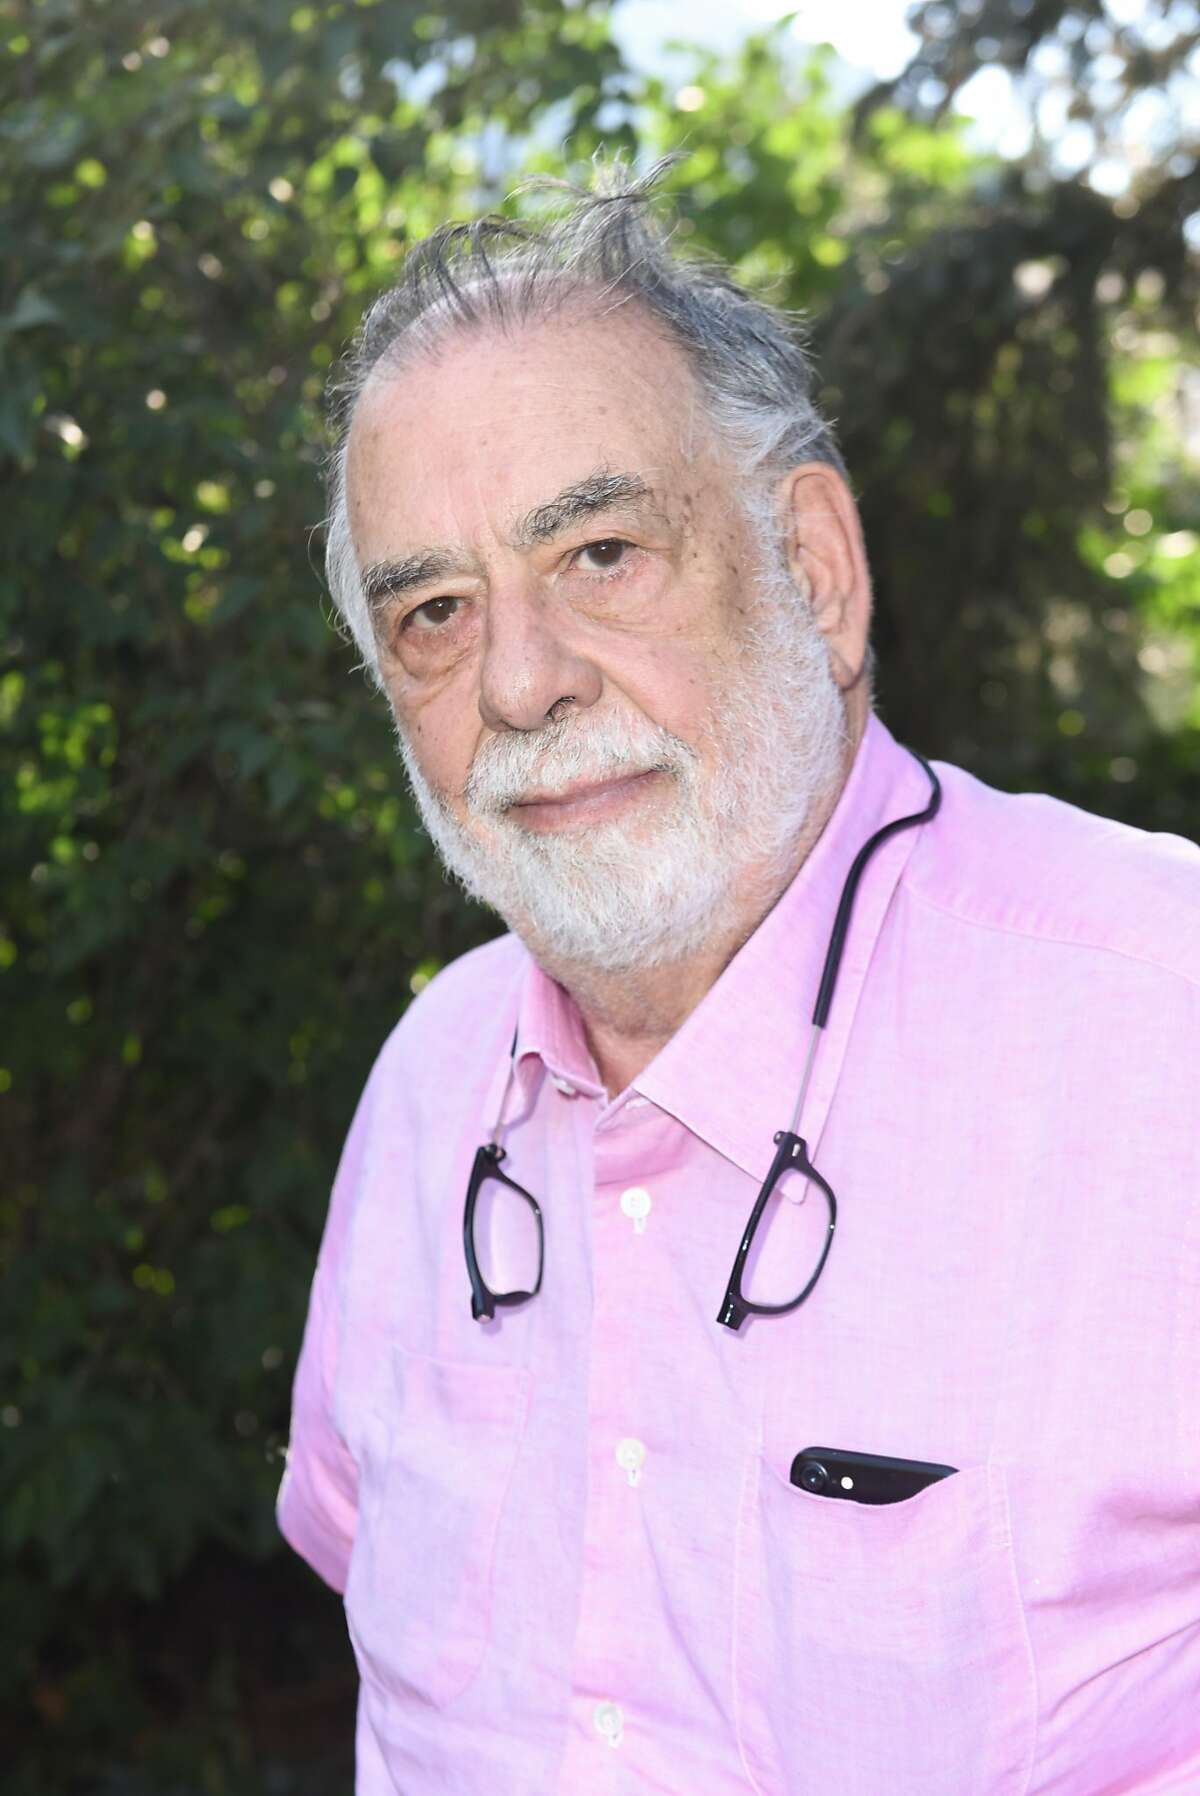 Francis Ford Coppola, author of "Live Cinema and Its Techniques."